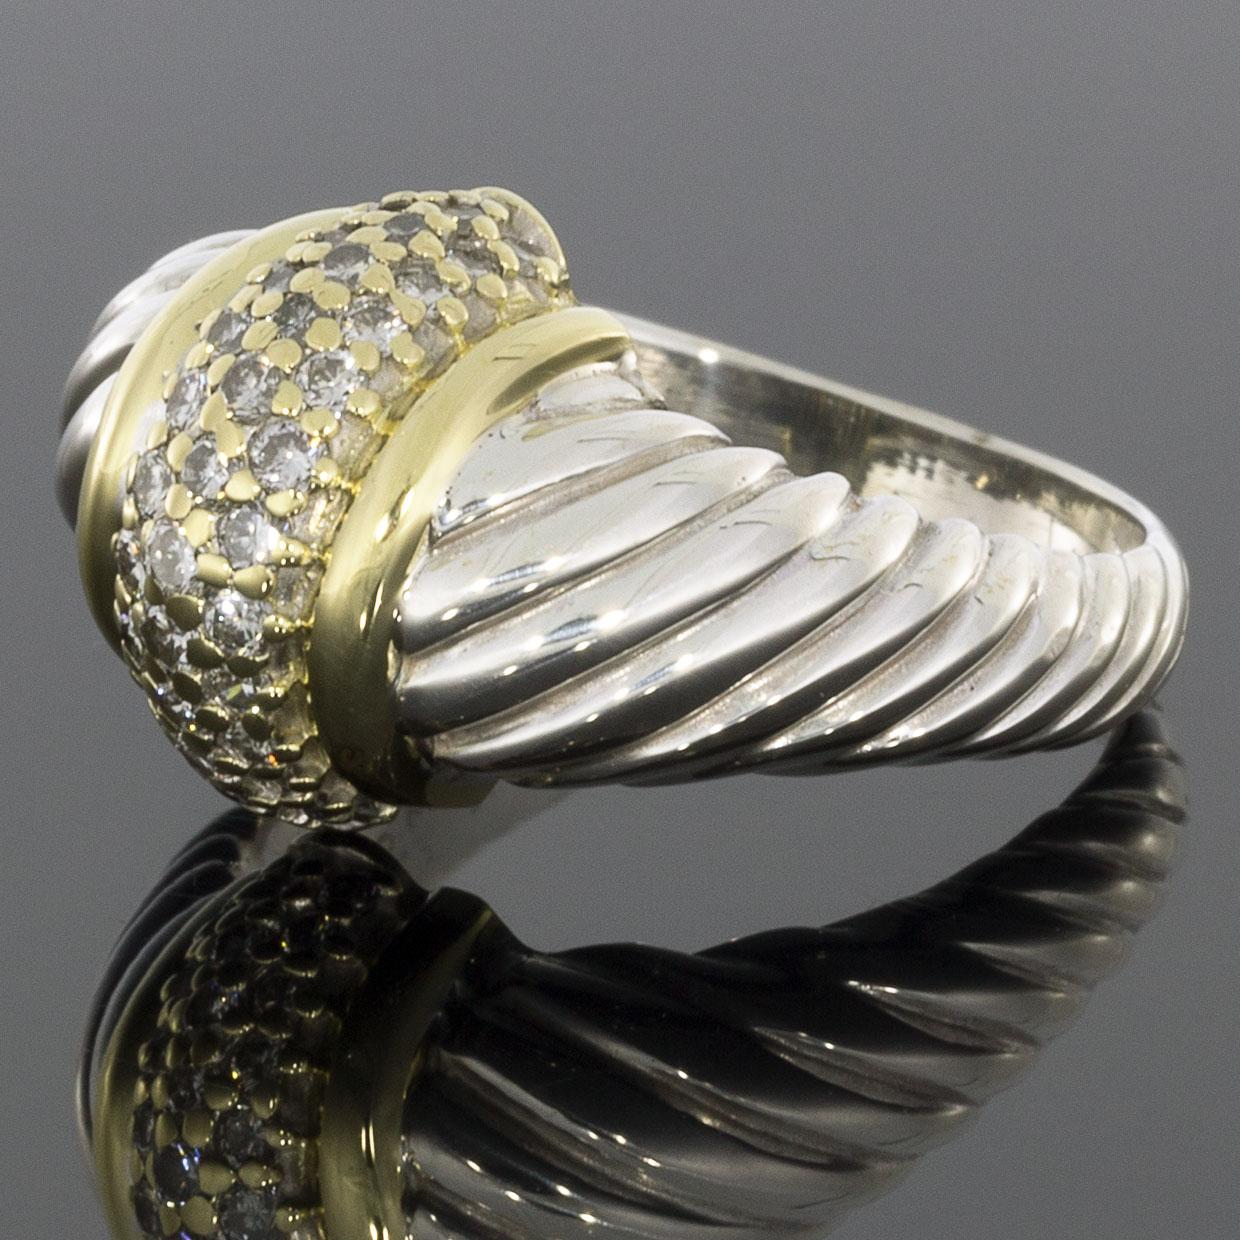 Item Details:
Estimated Retail - $795.00
Brand - David Yurman
Metal - 18 Karat Yellow Gold & 925 Sterling Silver
Total Carat Weight (TCW) - 0.57 ctw
Ring Size - 9.00
Sizable - Yes
Width - 14.30mm
Style - Band Ring

Stone 1 Information:
Stone Type -